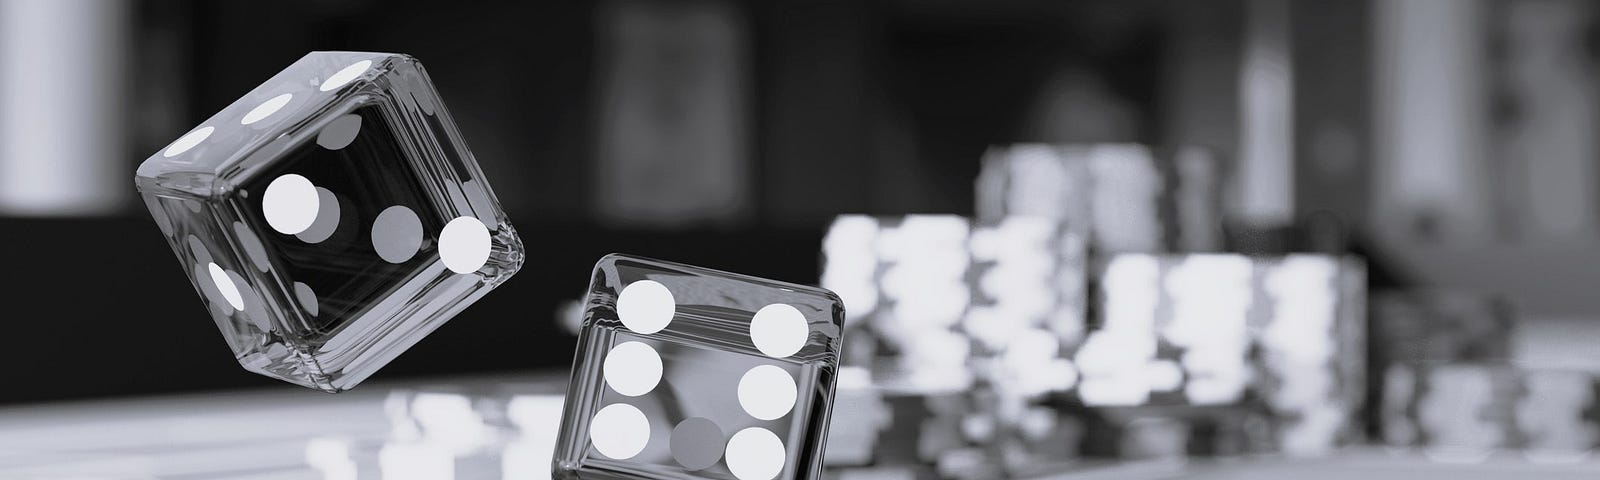 Photo of dice being tossed above a gambling table in a casino.